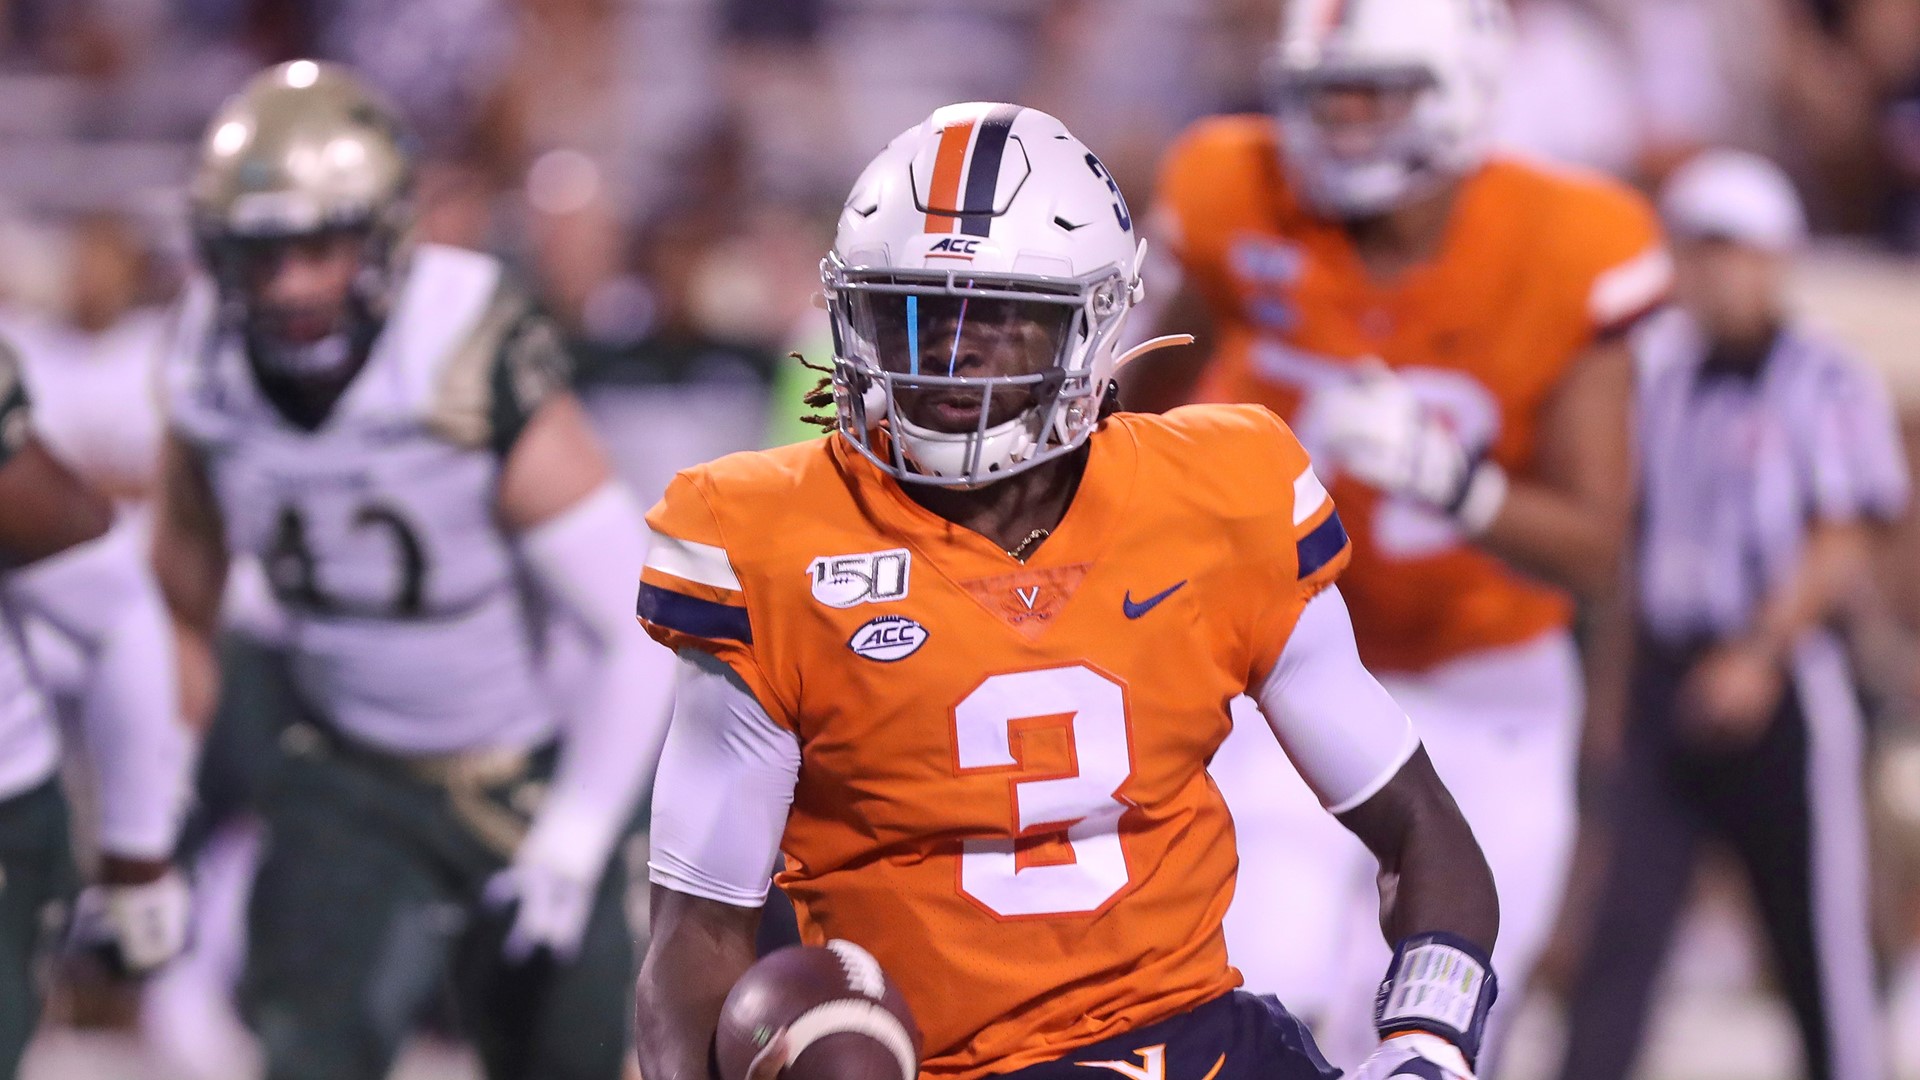 Hear from Coach Mendenhall and QB Bryce Perkins about the rankings and the Seminoles.